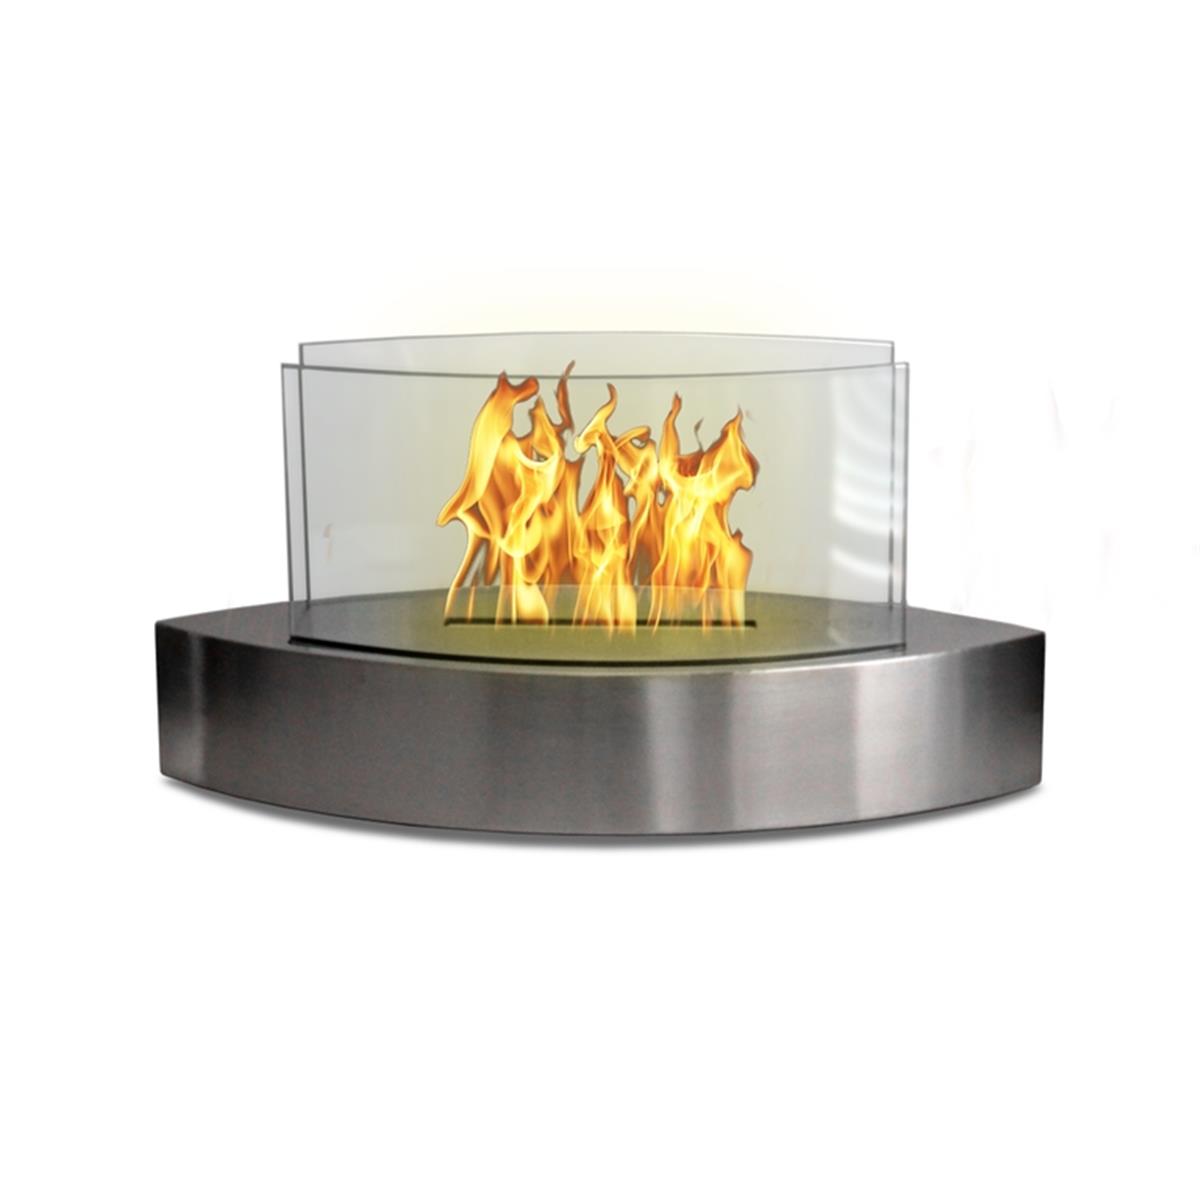 Anywhere Fireplace 90217 Lexington Tabletop Bio-Ethanol Fireplace - Stainless Steel